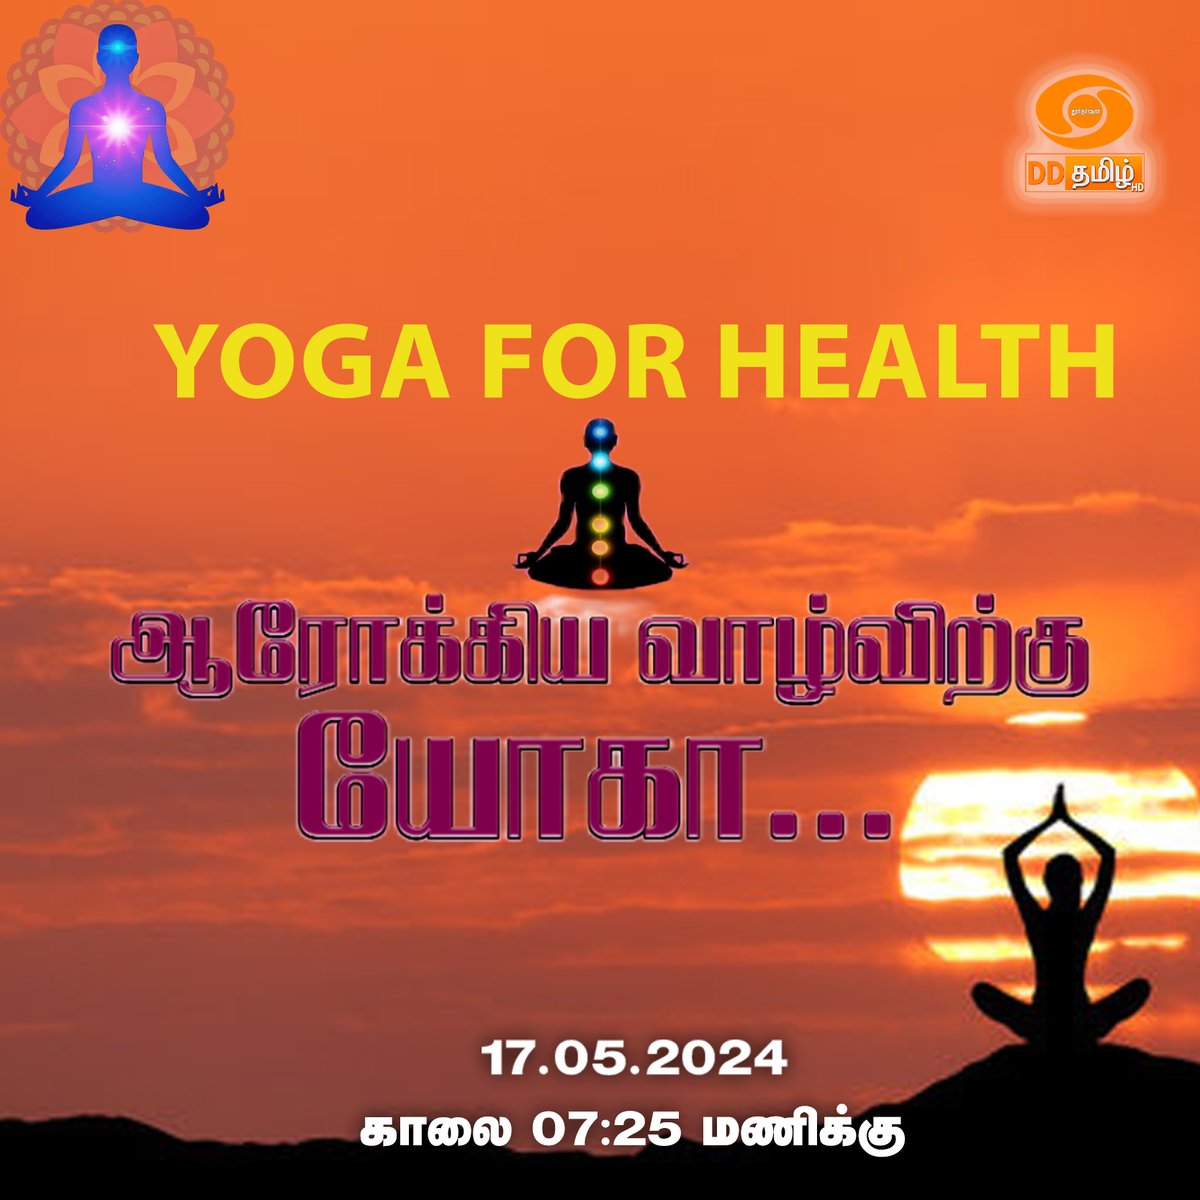 🌅 Elevate your mornings with a splash of wellness! 🧘‍♂️ Dive into the serenity of 'Yoga for Health - Arokkiya Vaazhvirkku Yoga' Repeat Telecast on @DDTamilOfficial | daily at the zen o'clock of 7:25 AM #ArokkiyaVaazhvirkkuYoga #DDtamilYoga #WellnessRituals #morningmantra